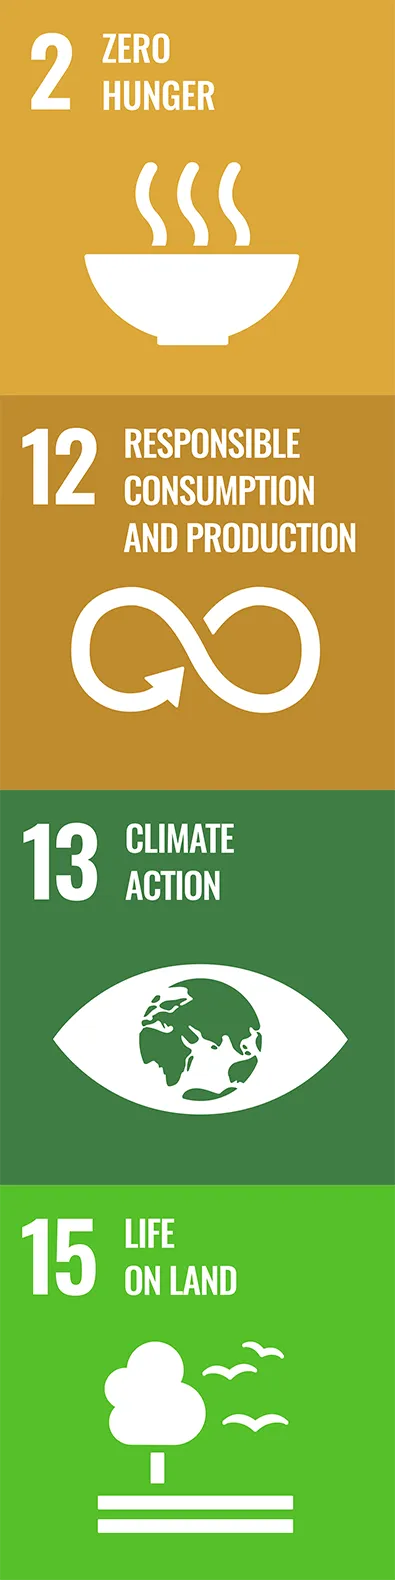 united nation goals we're tackling with nerthus programme: zero hunger responsible consumption and production, life on land and climate action.